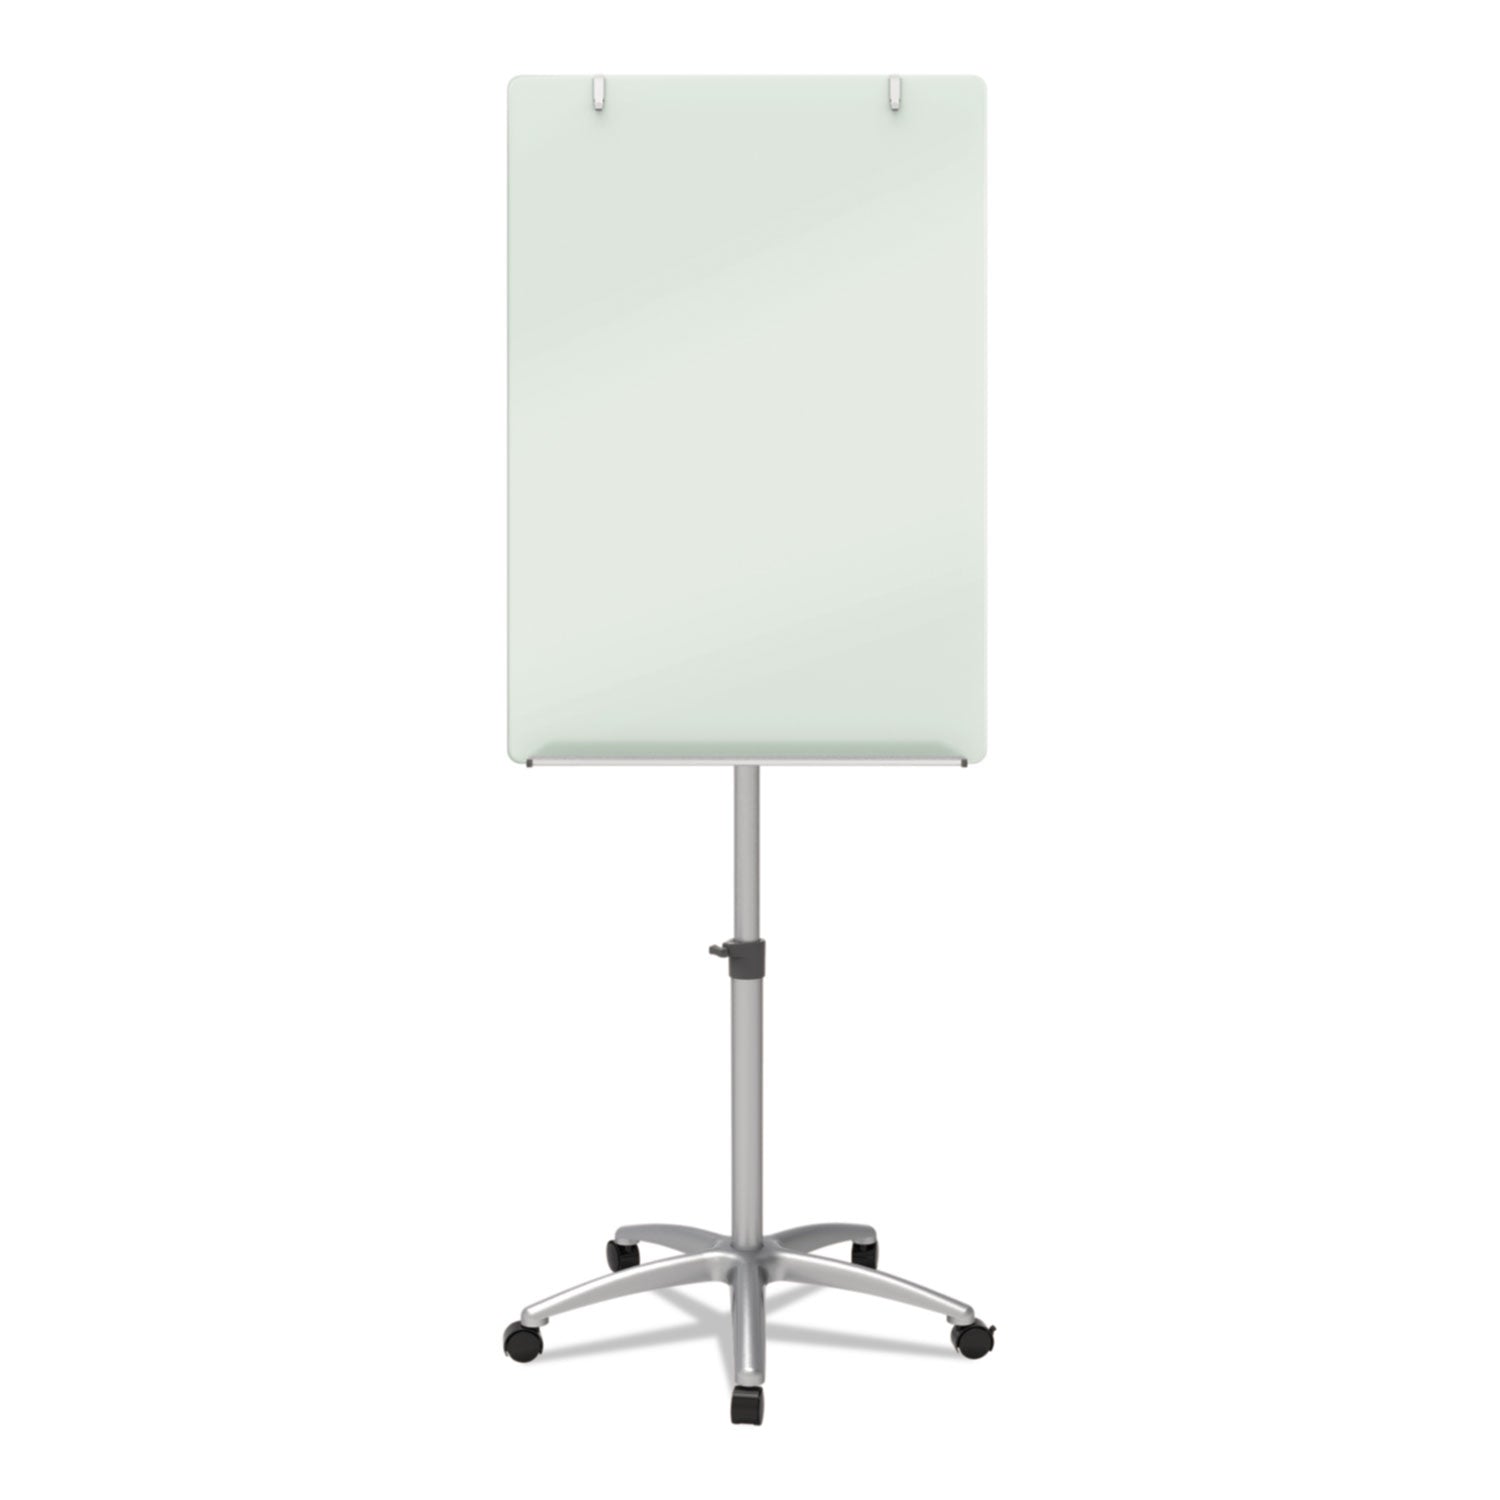 Infinity Glass Mobile Presentation Easel, 3 ft x 2 ft, Silver/White - 